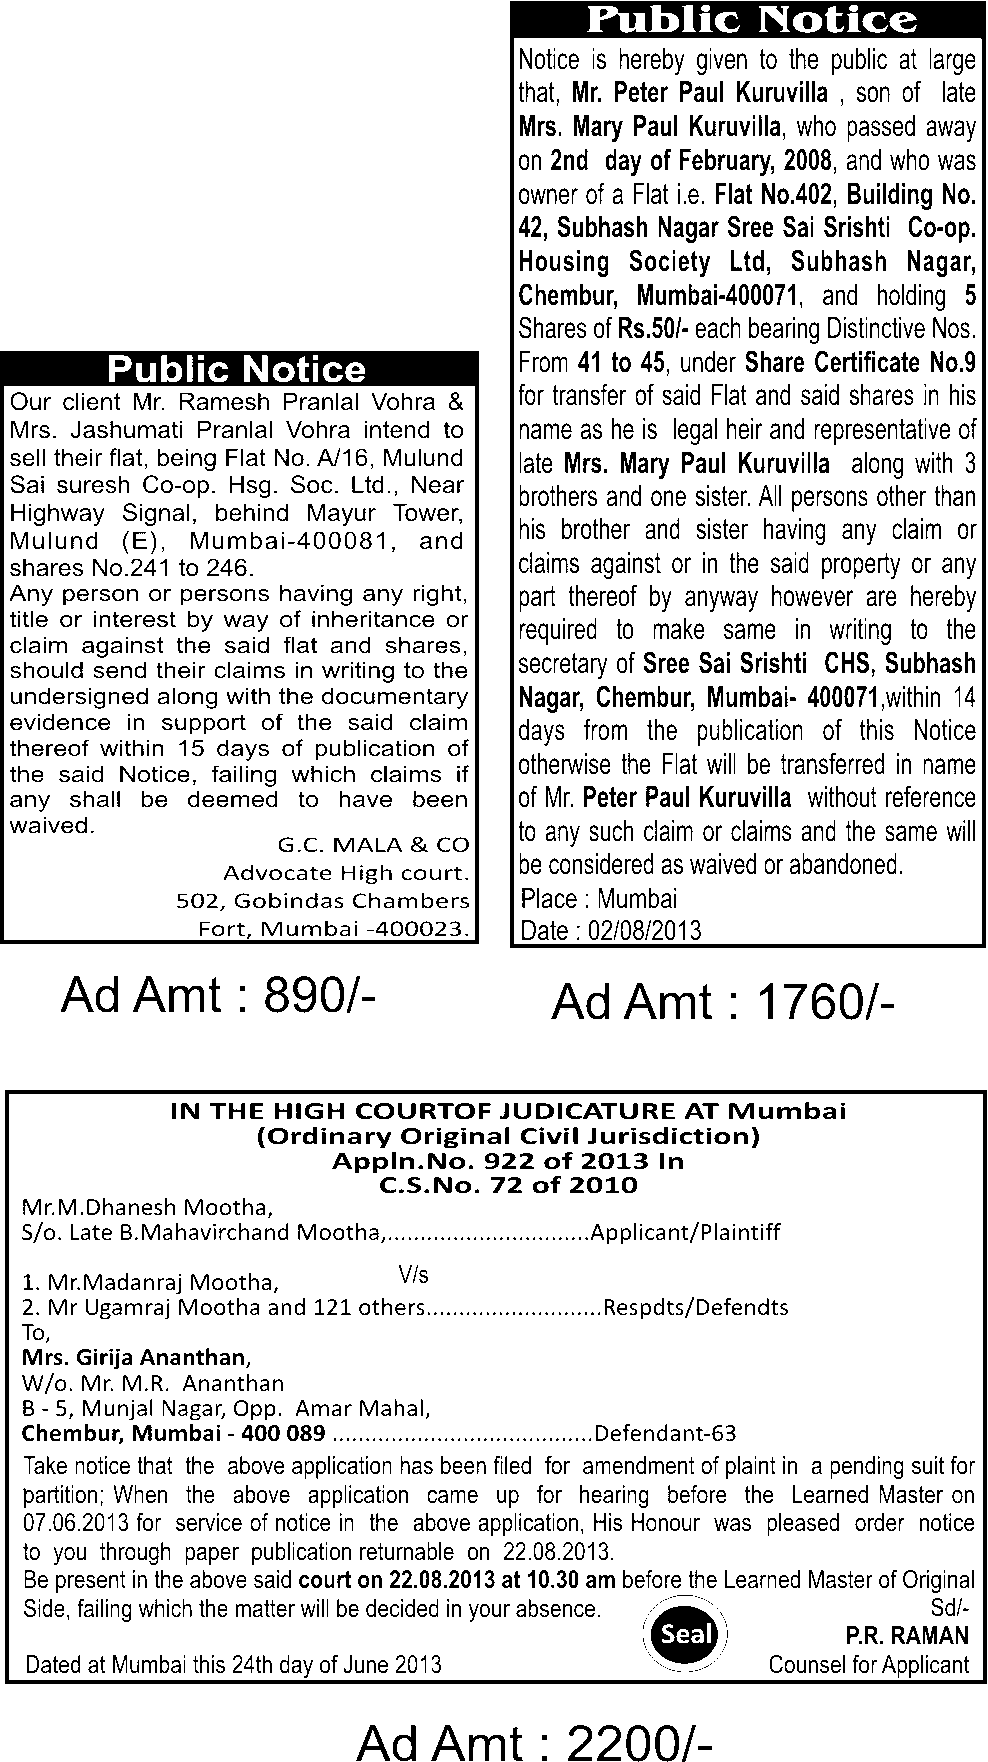 LEGAL NOTICE ADS IN 2 NEWSPAPERS 890/ ONWARDS